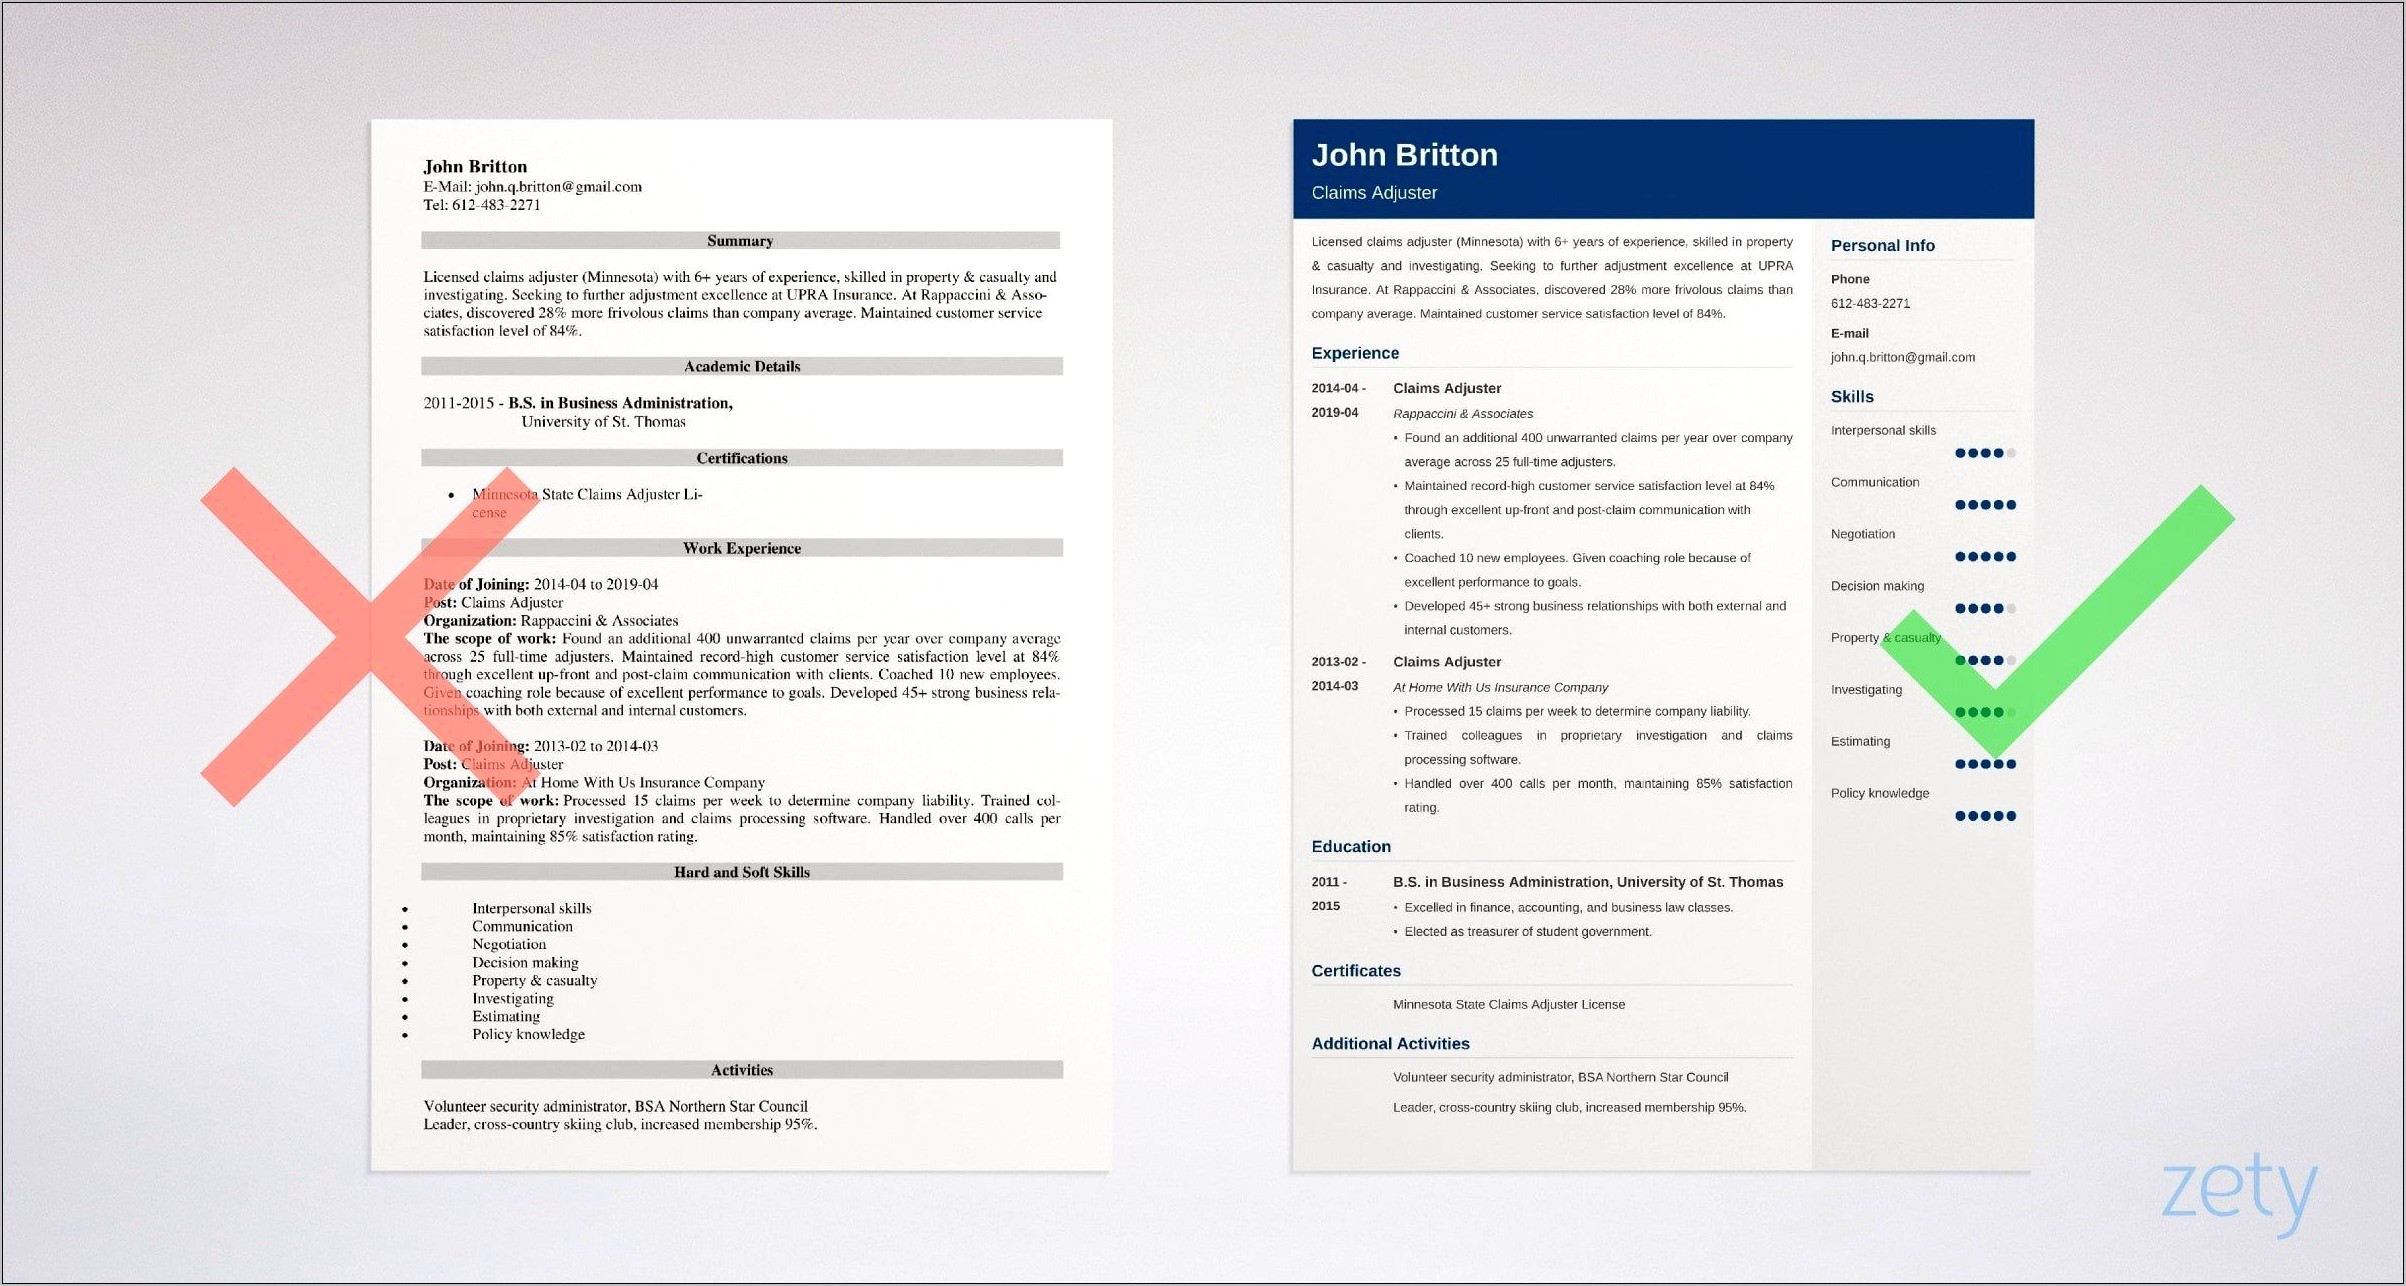 Bodily Injury Claims Adjuster Resume Examples